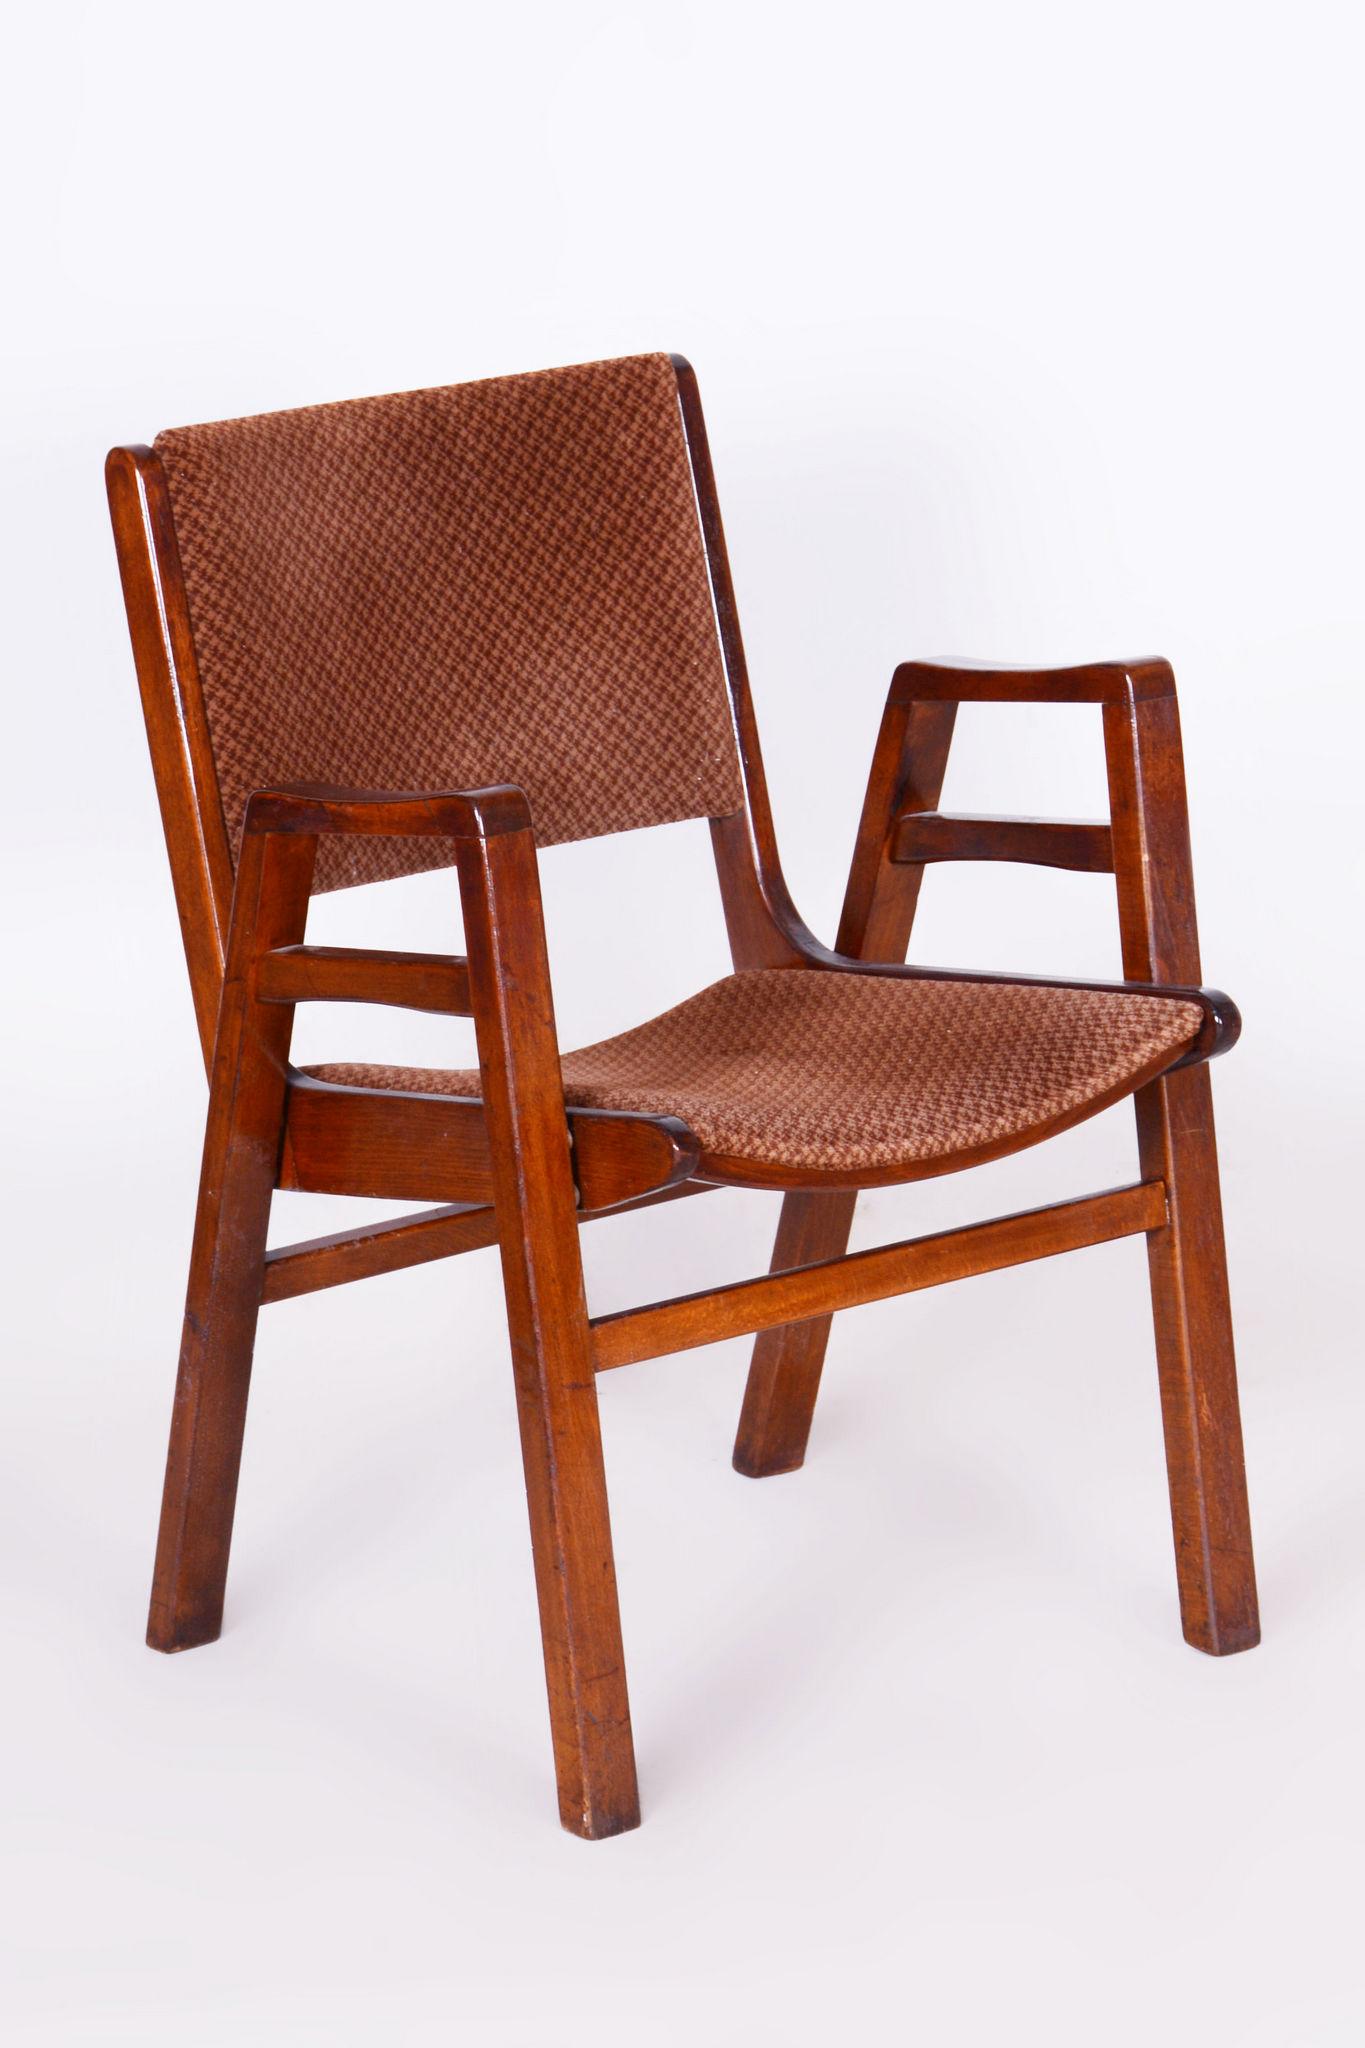 Material: Beech
Period: 1950-1959

This item features classic Mid-Century Modern (MCM) design elements. Elements of MCM interior design include clean lines, muted tones, a combination of natural and manmade materials, graphic shapes, and vibrant